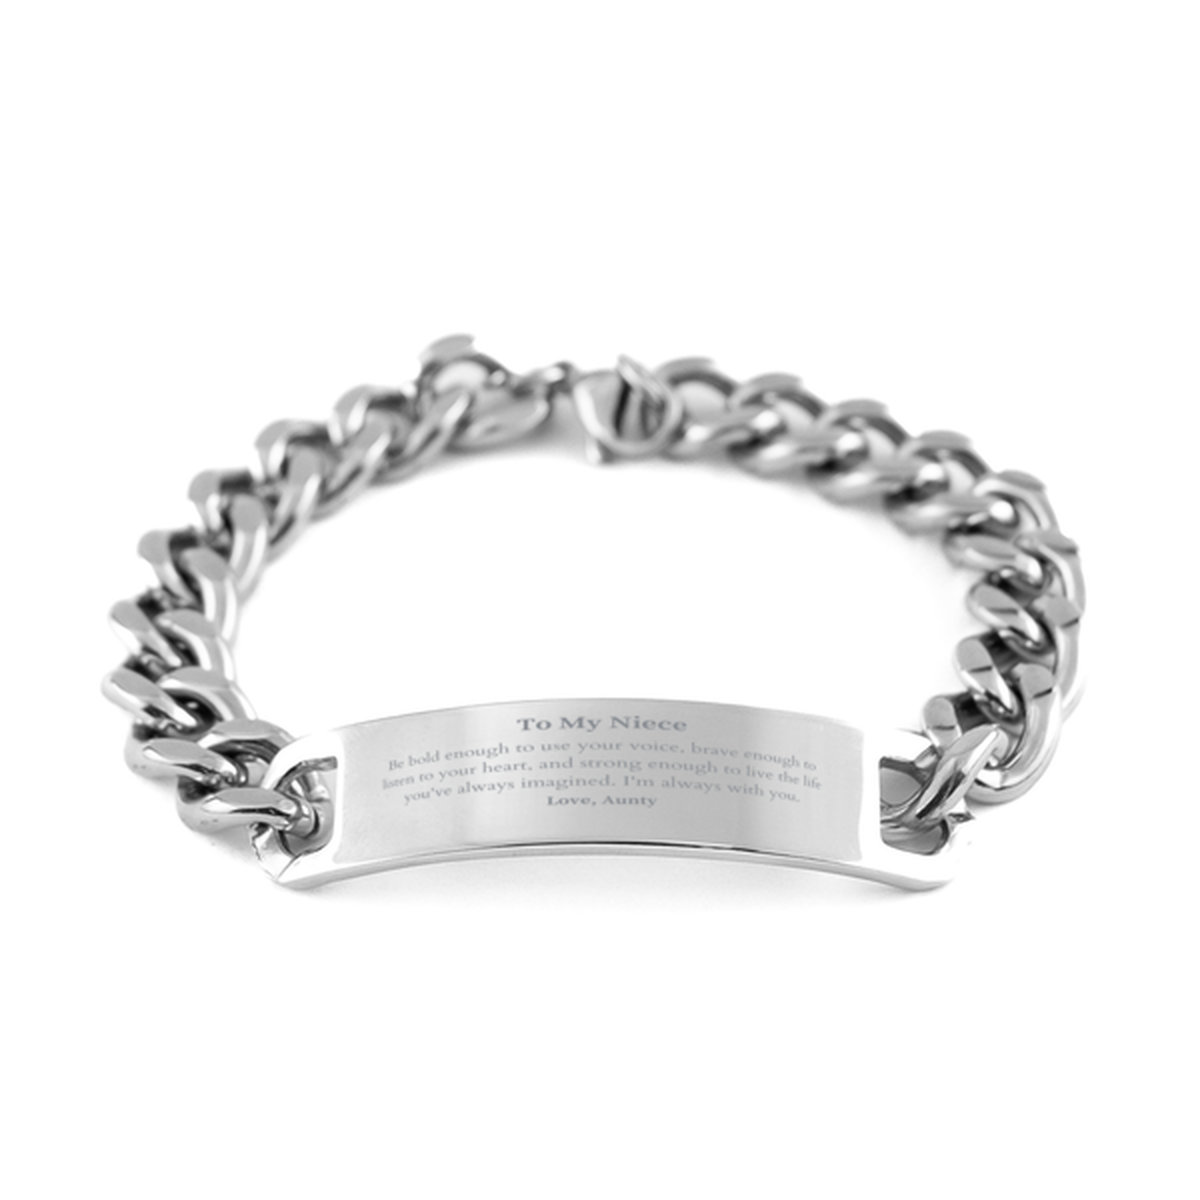 Keepsake Niece Cuban Chain Stainless Steel Bracelet Gift Idea Graduation Christmas Birthday Niece from Aunty, Niece Be bold enough to use your voice, brave enough to listen to your heart. Love, Aunty